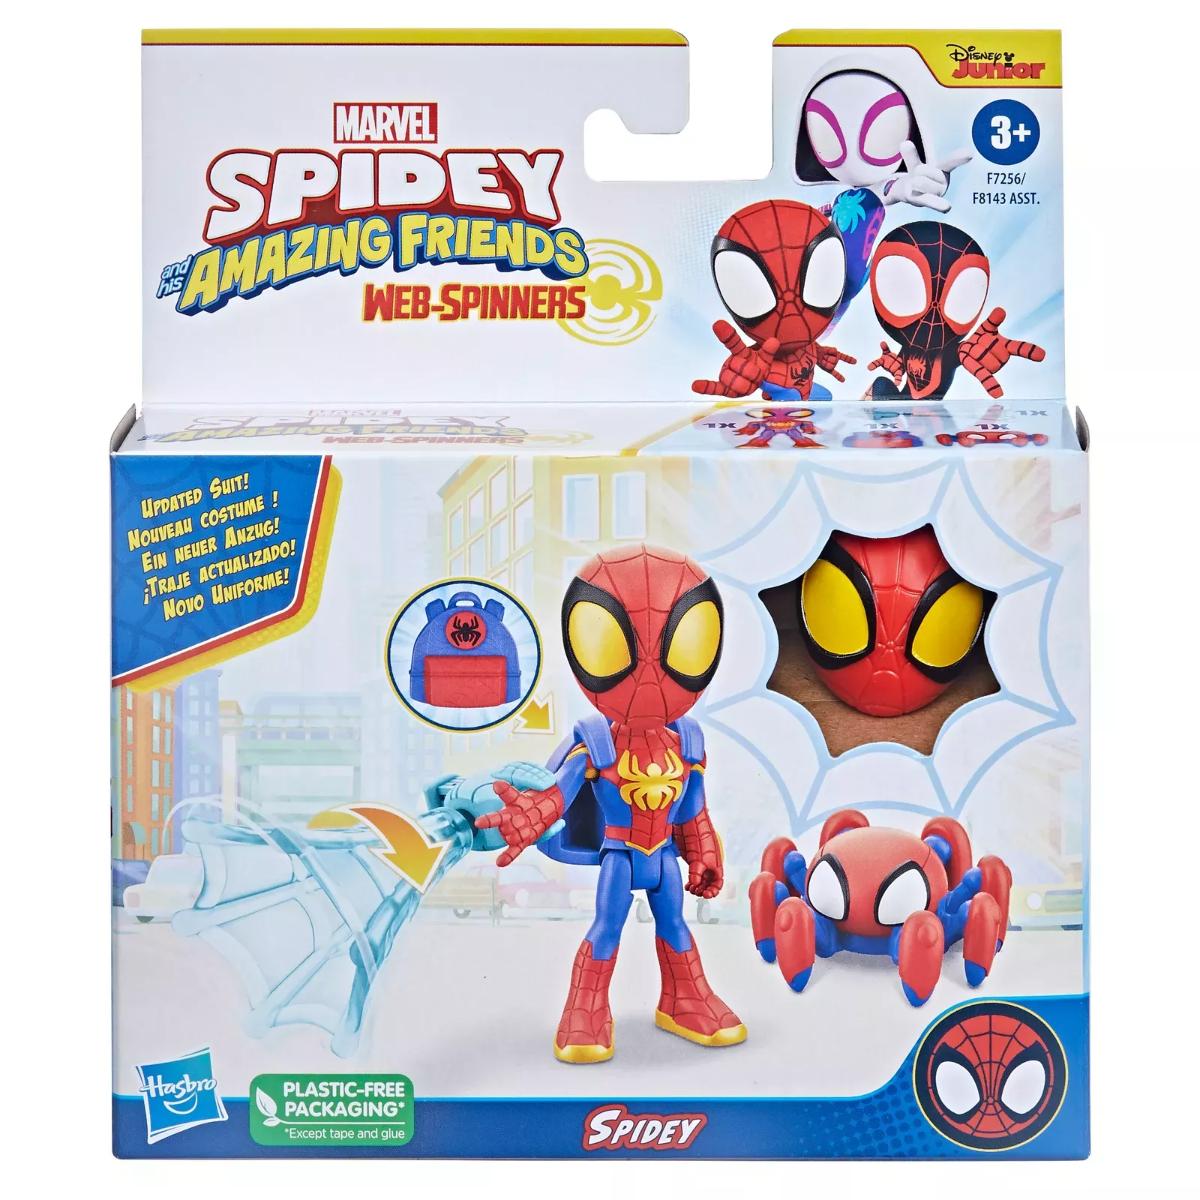 Figurina cu accesorii, Spidey and his Amazing Friends, Web-Spinners, Spidey, F7256